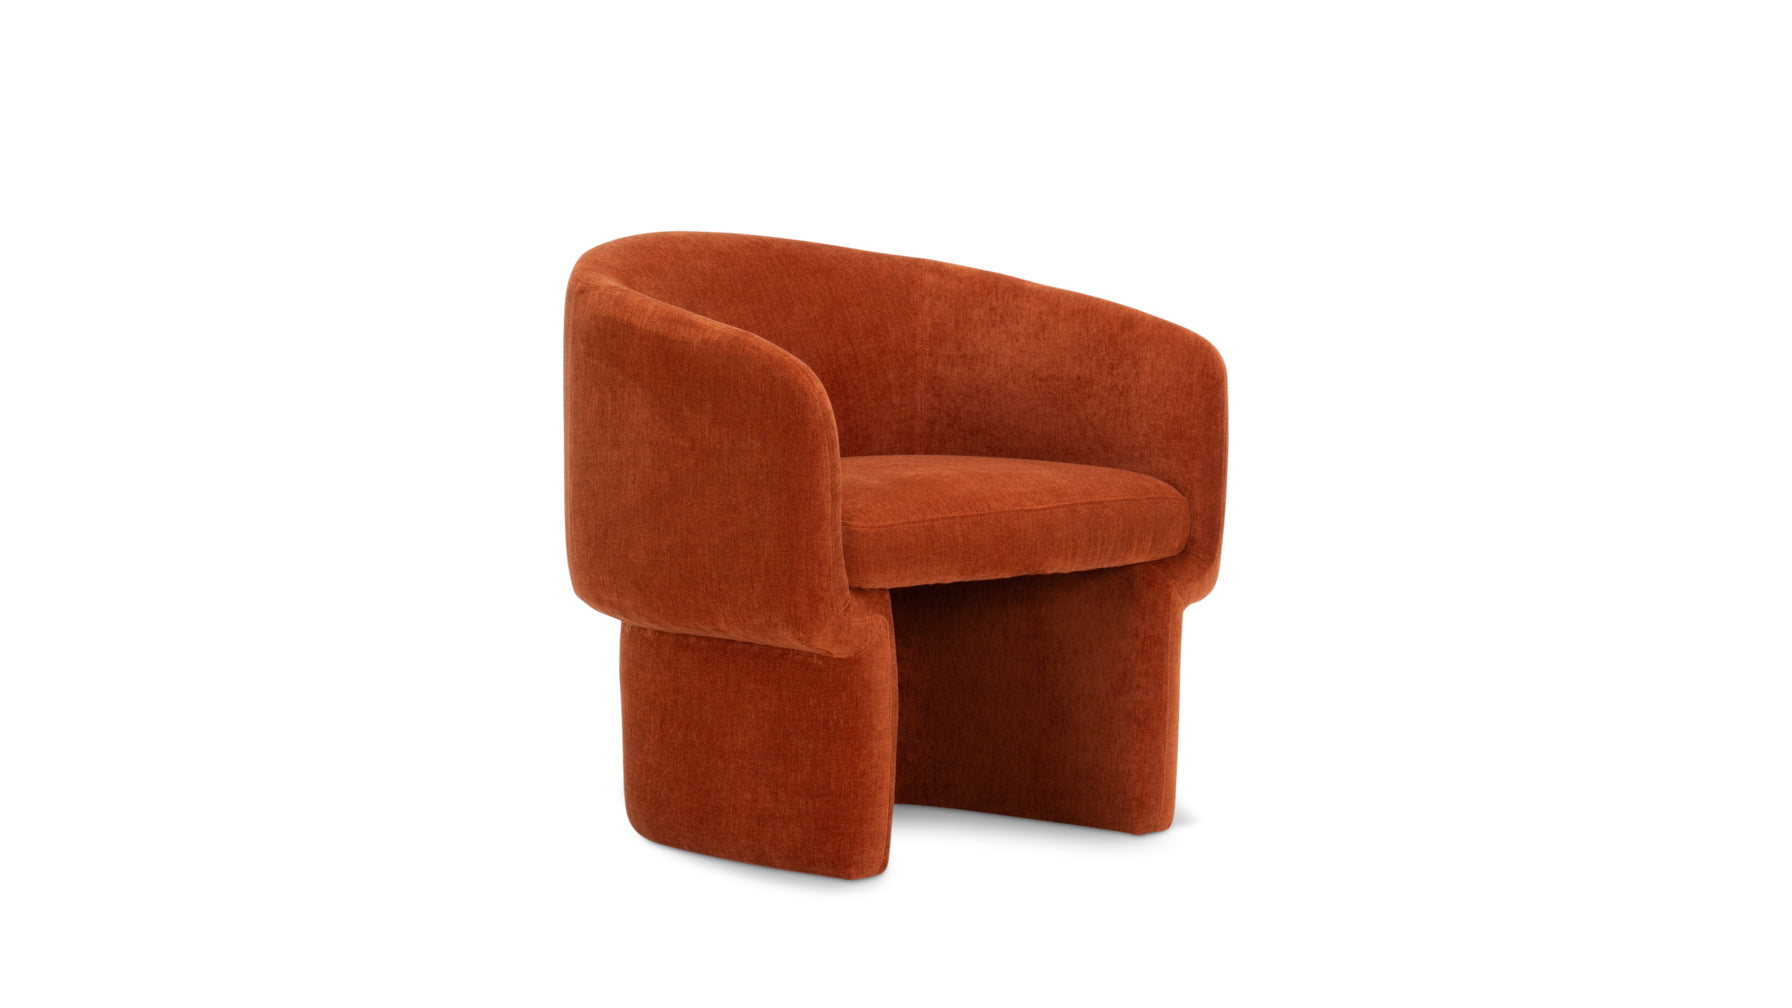 Embrace Lounge Chair, Harvest - Image 2